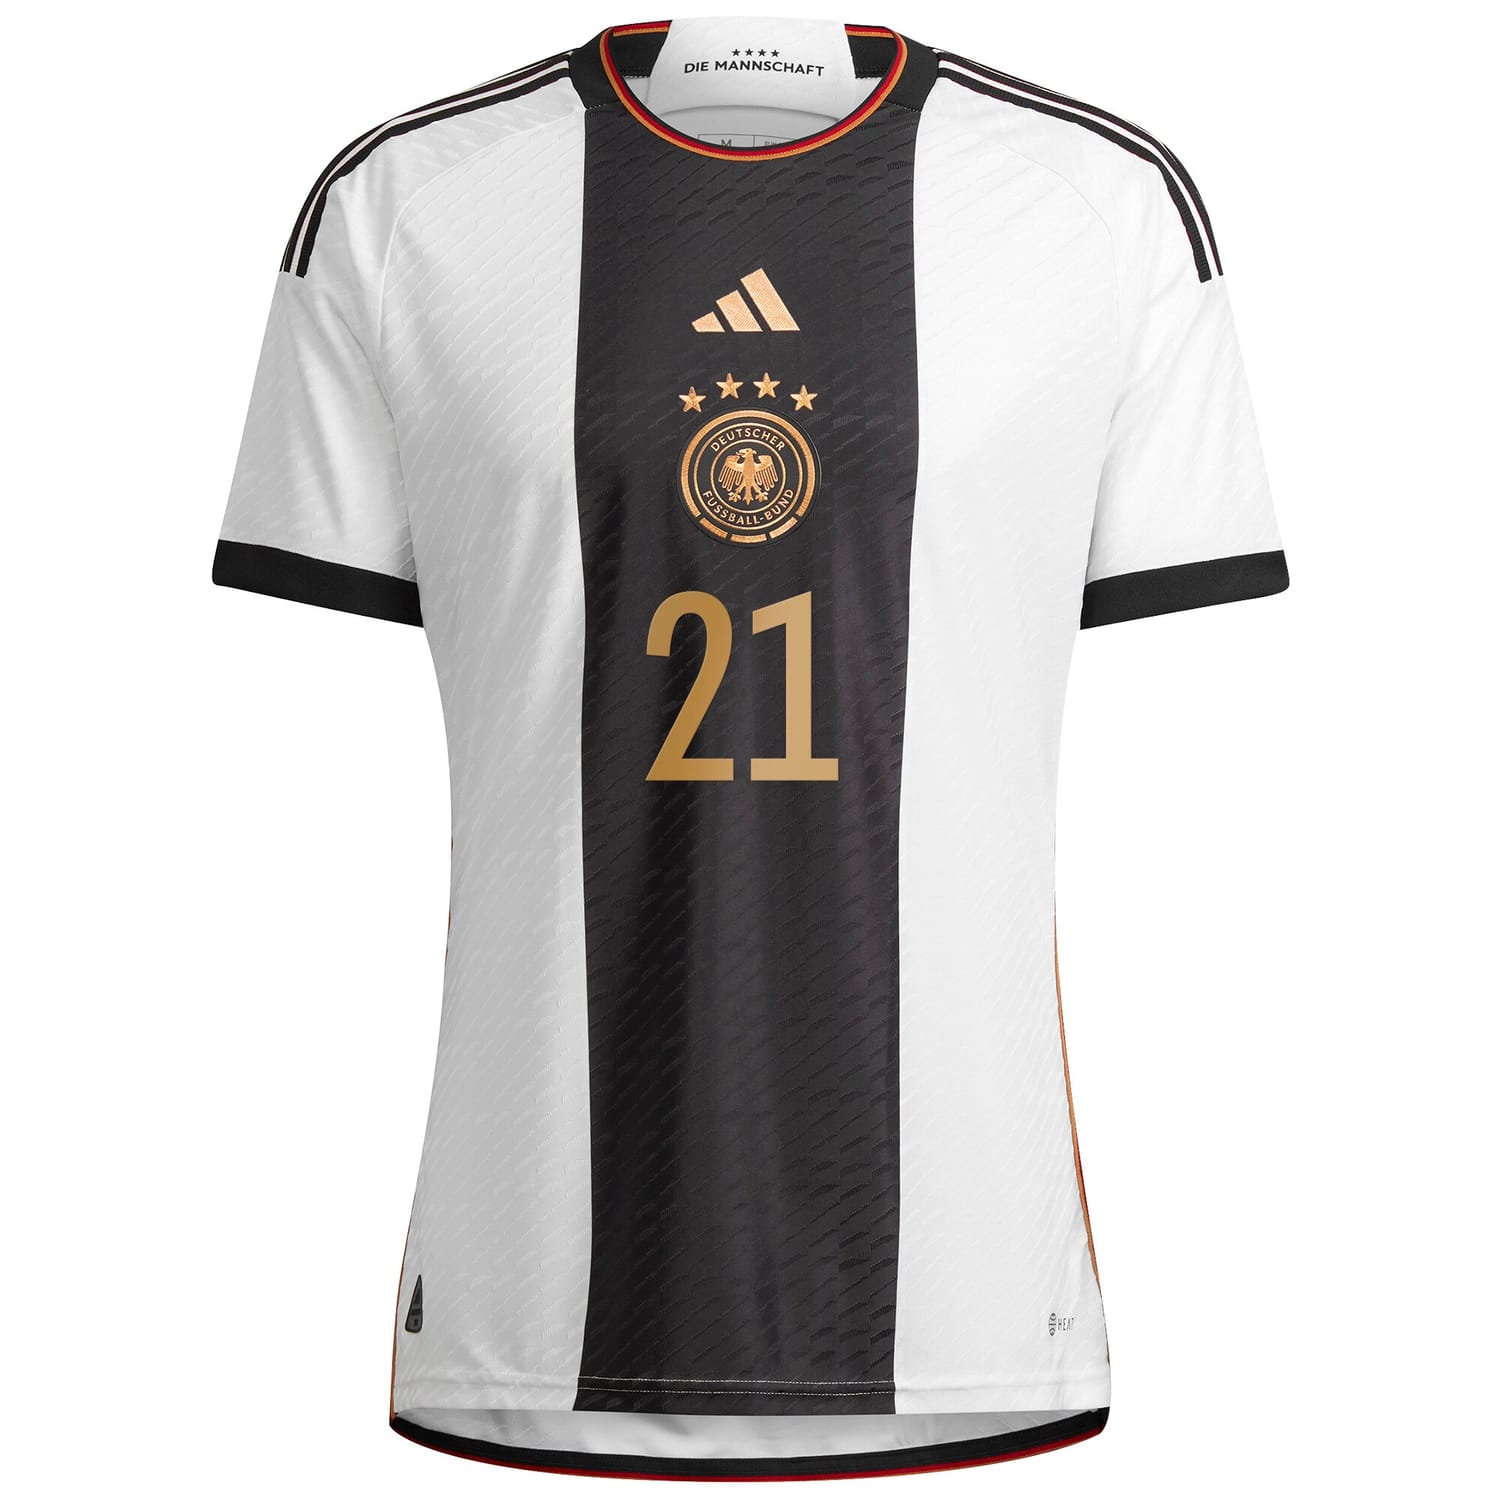 Germany National Team Home Authentic Jersey Shirt player Ilkay Gündogan 21 printing for Men